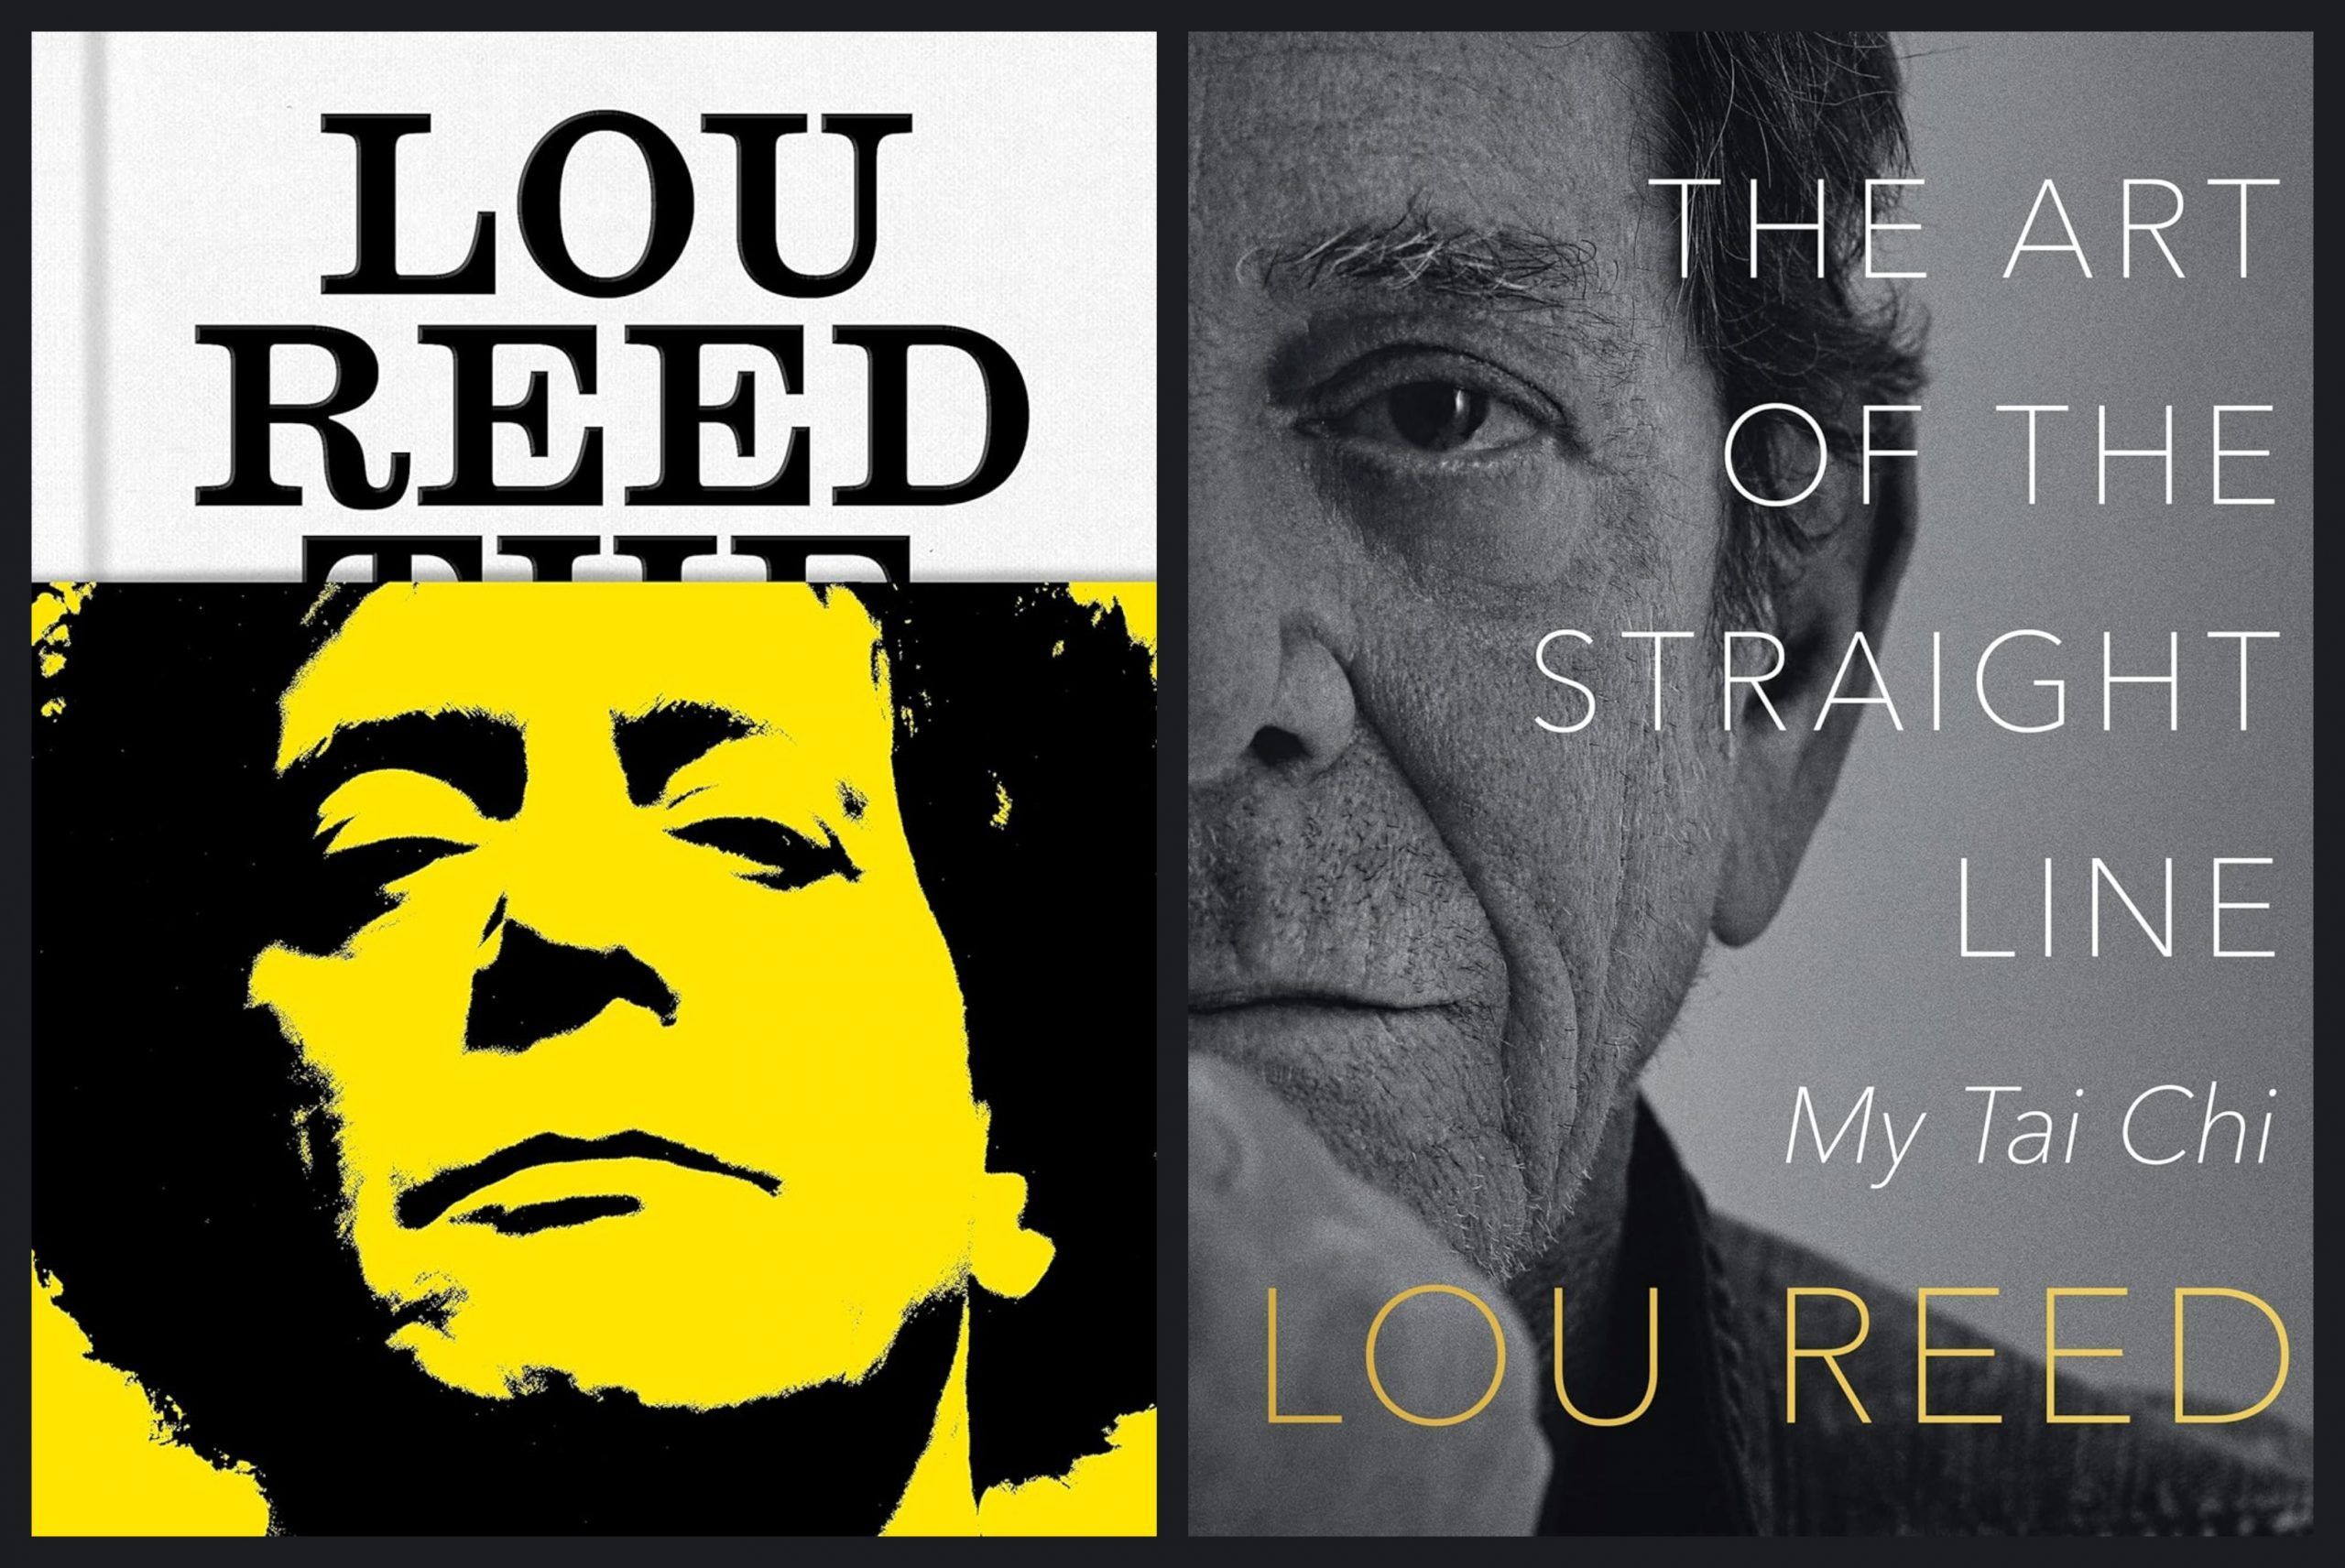 That Mystic Shit: On Lou Reed’s “The Art of the Straight Line” and Will Hermes’s “The King of New York”